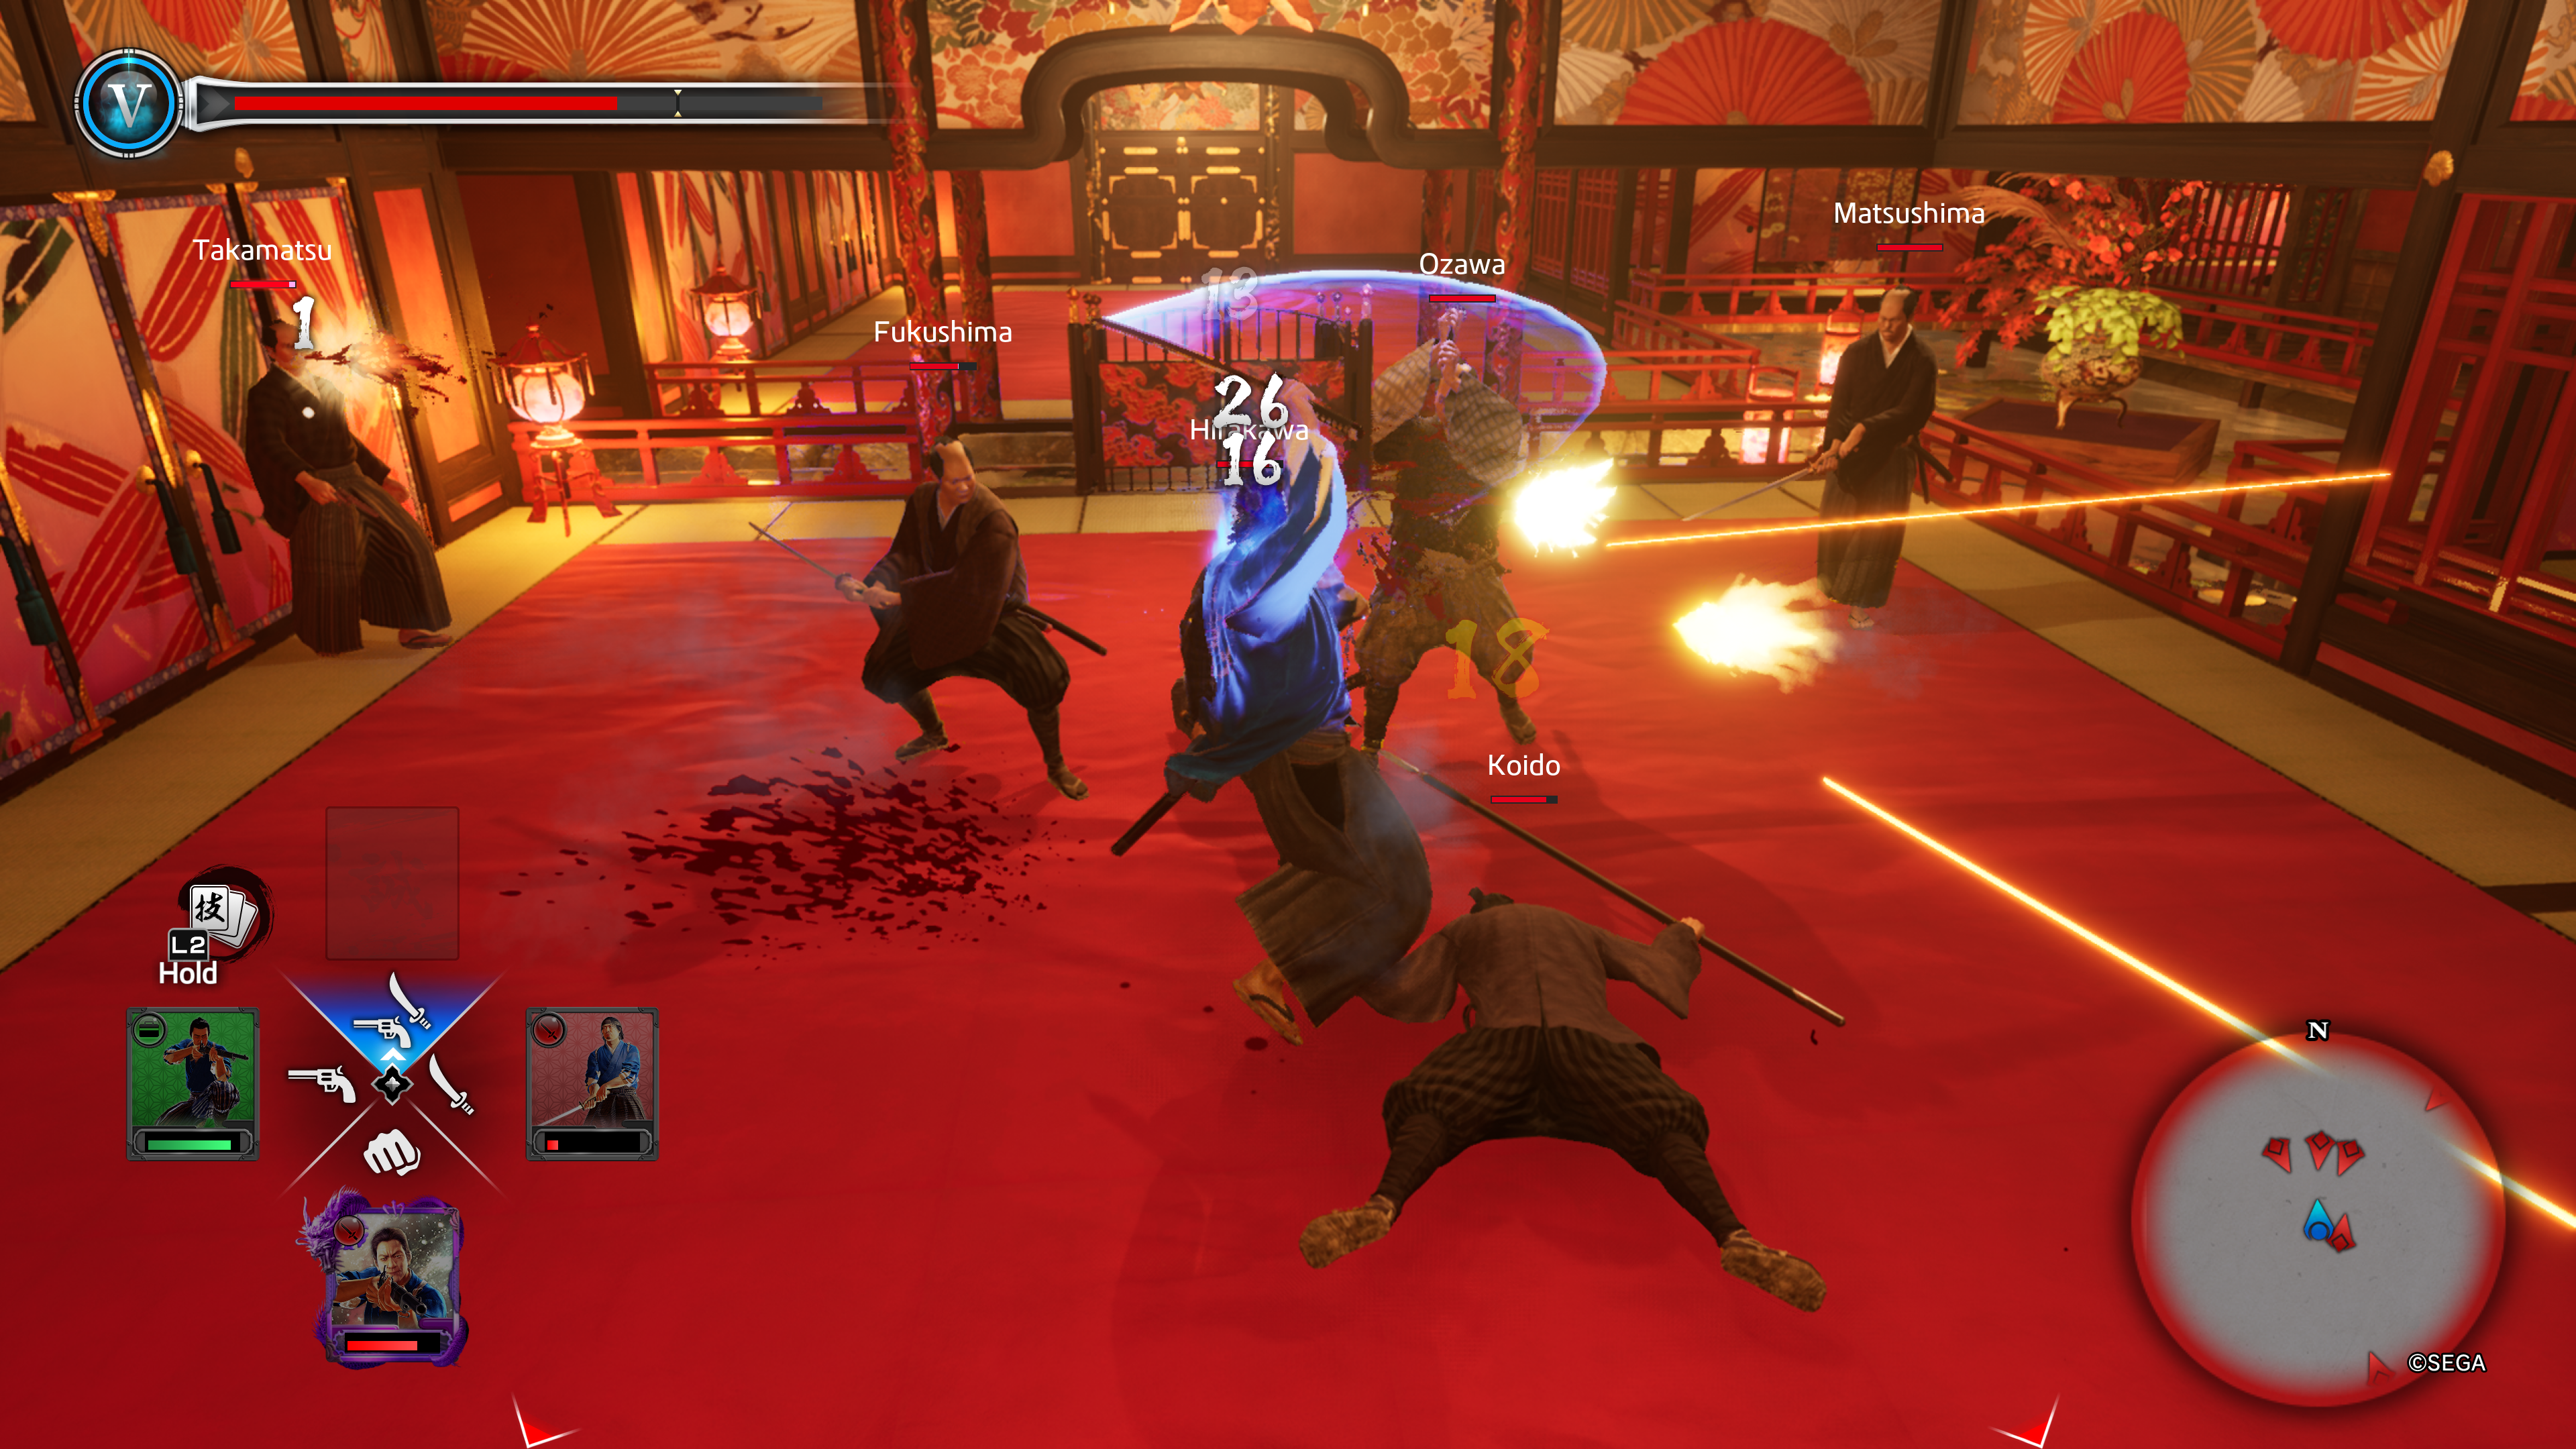 Like a Dragon Ishin review - Ryoma fights several enemies in a red and gold room, three fighting styles are displayed on the bottom left of the UI